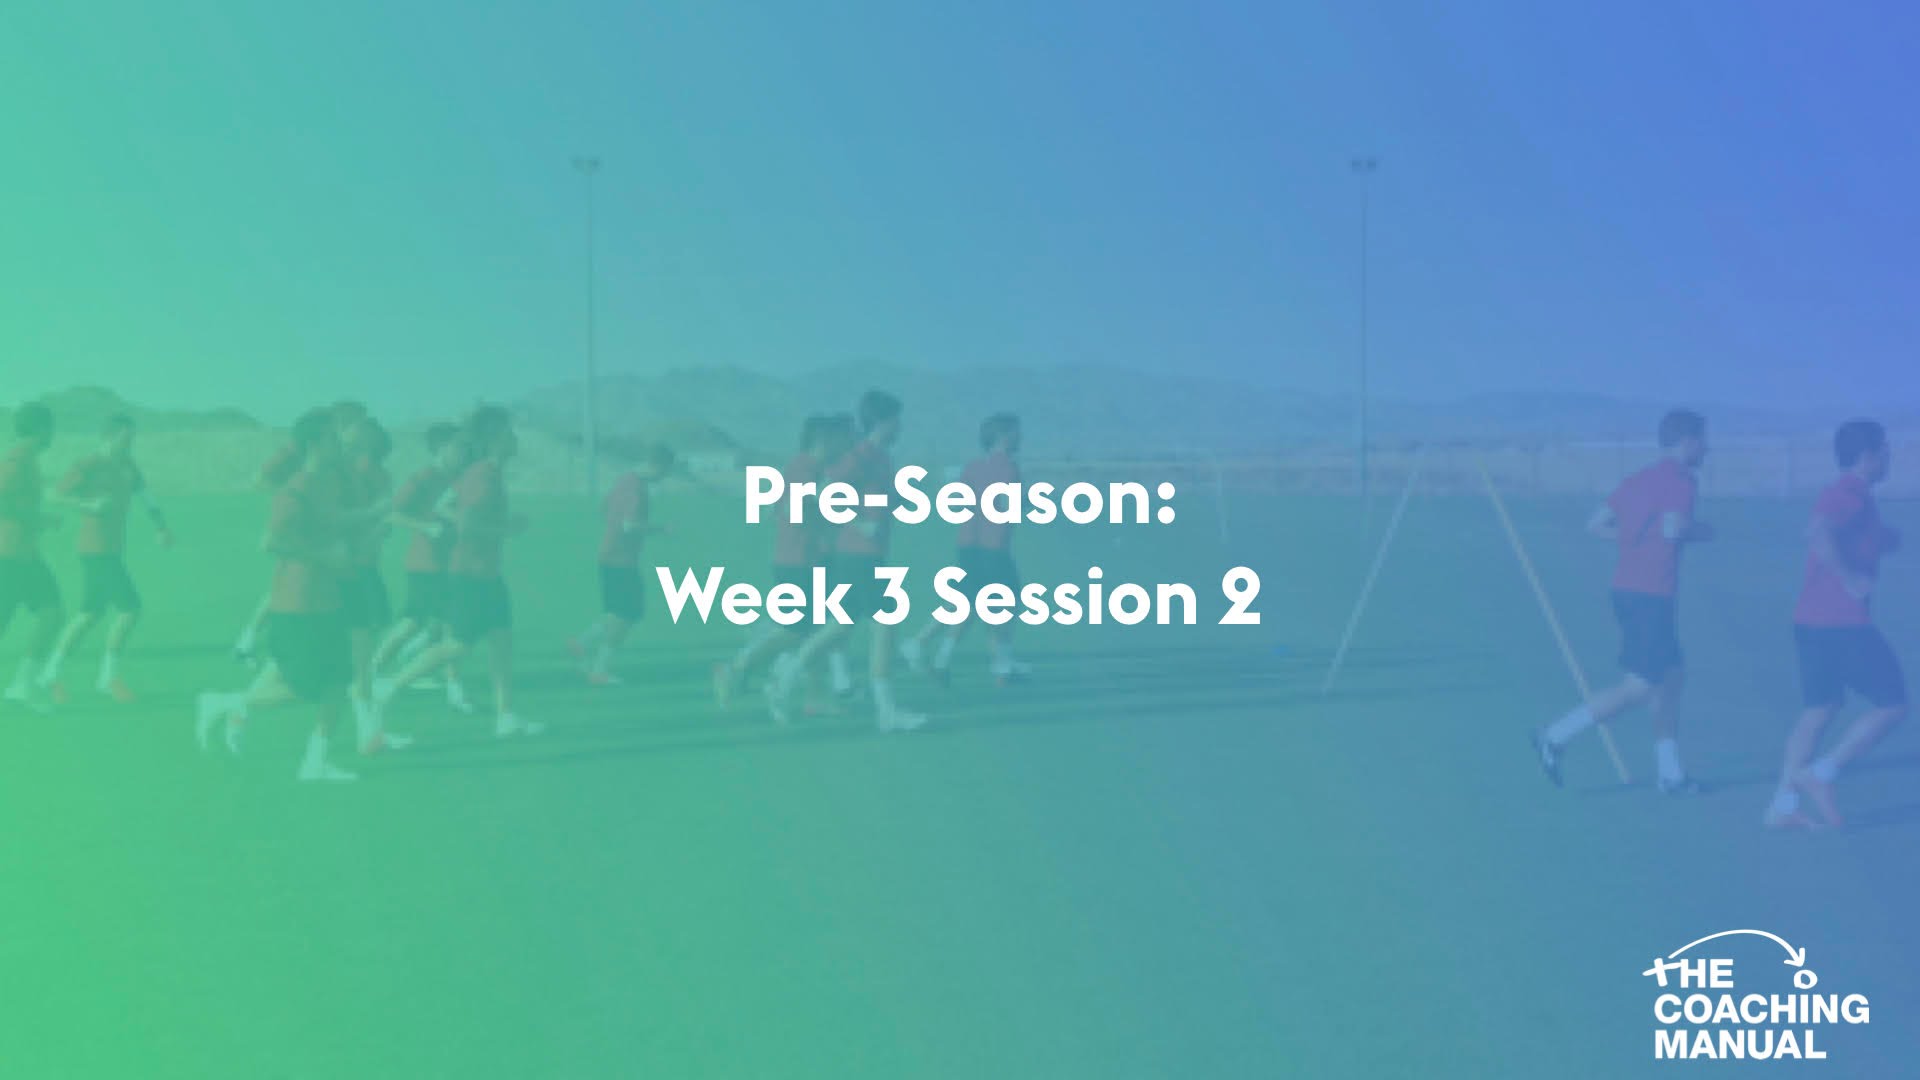 Pre-Season: Week 3 Session 2 - Conditioned Game 2 - The Coaching Manual